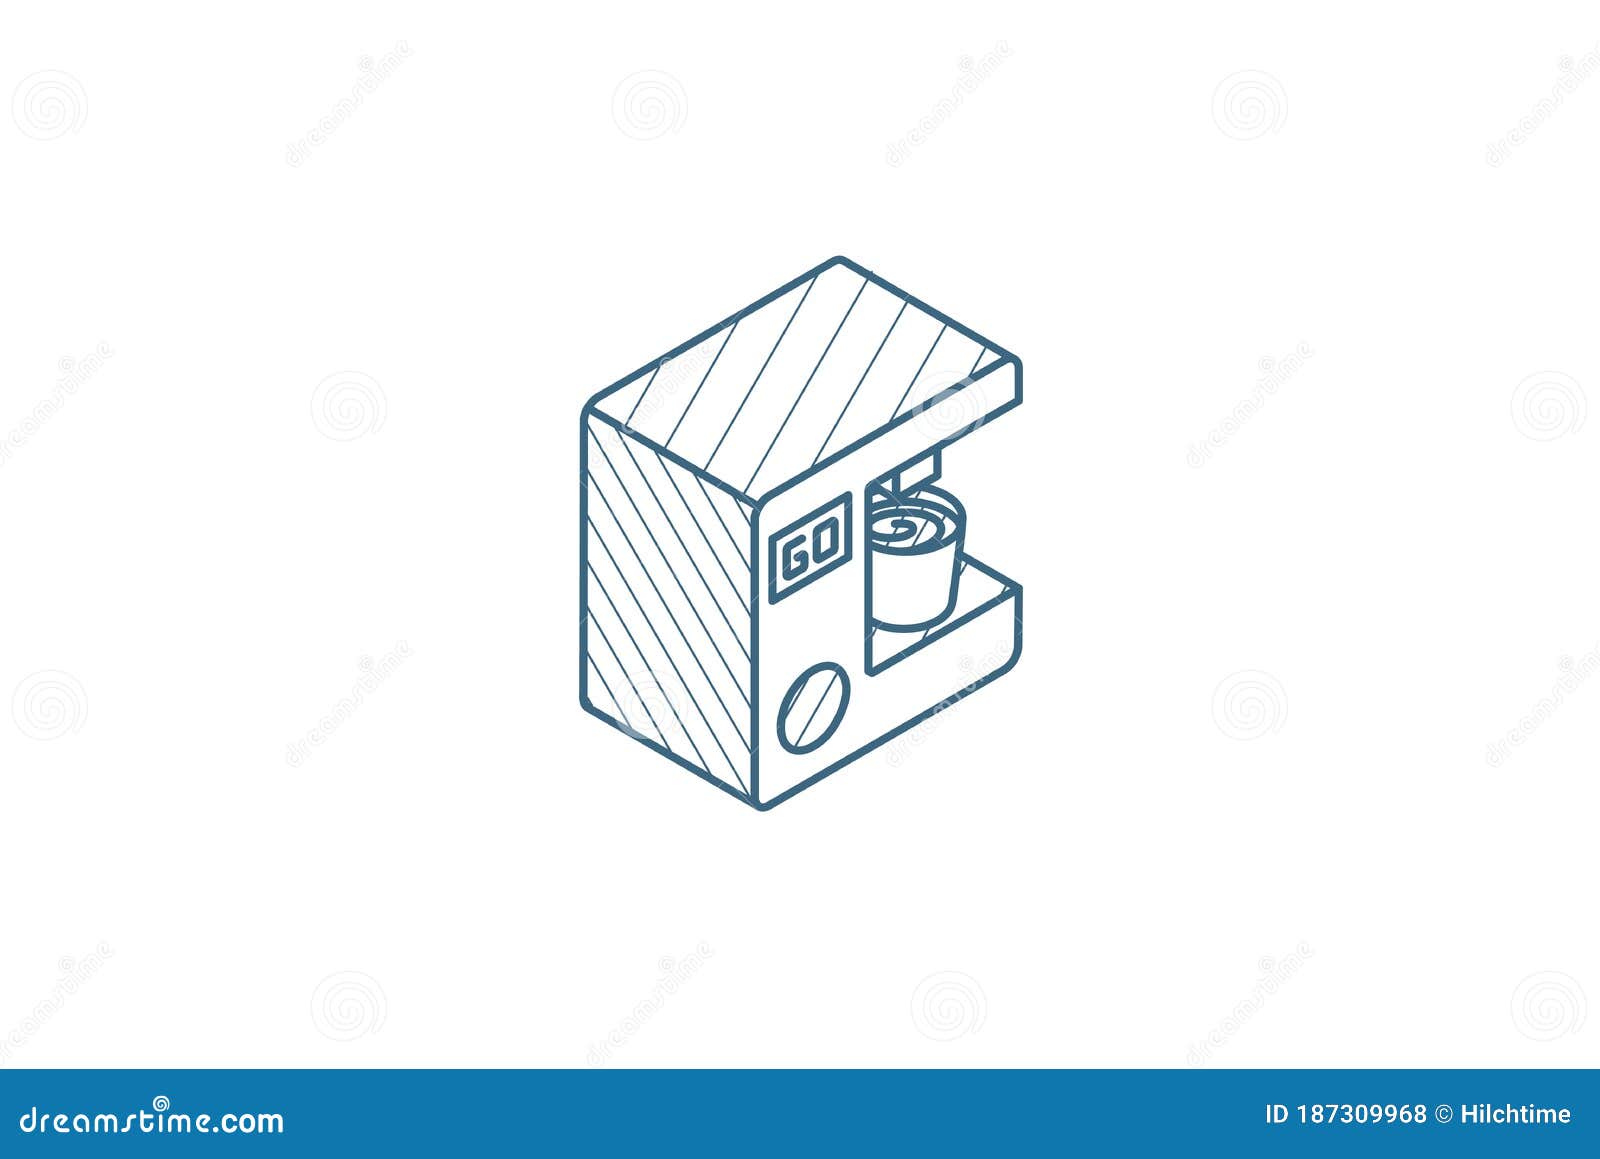 Coffee cup icon isometric 3d style  stock vector 3169680  Crushpixel